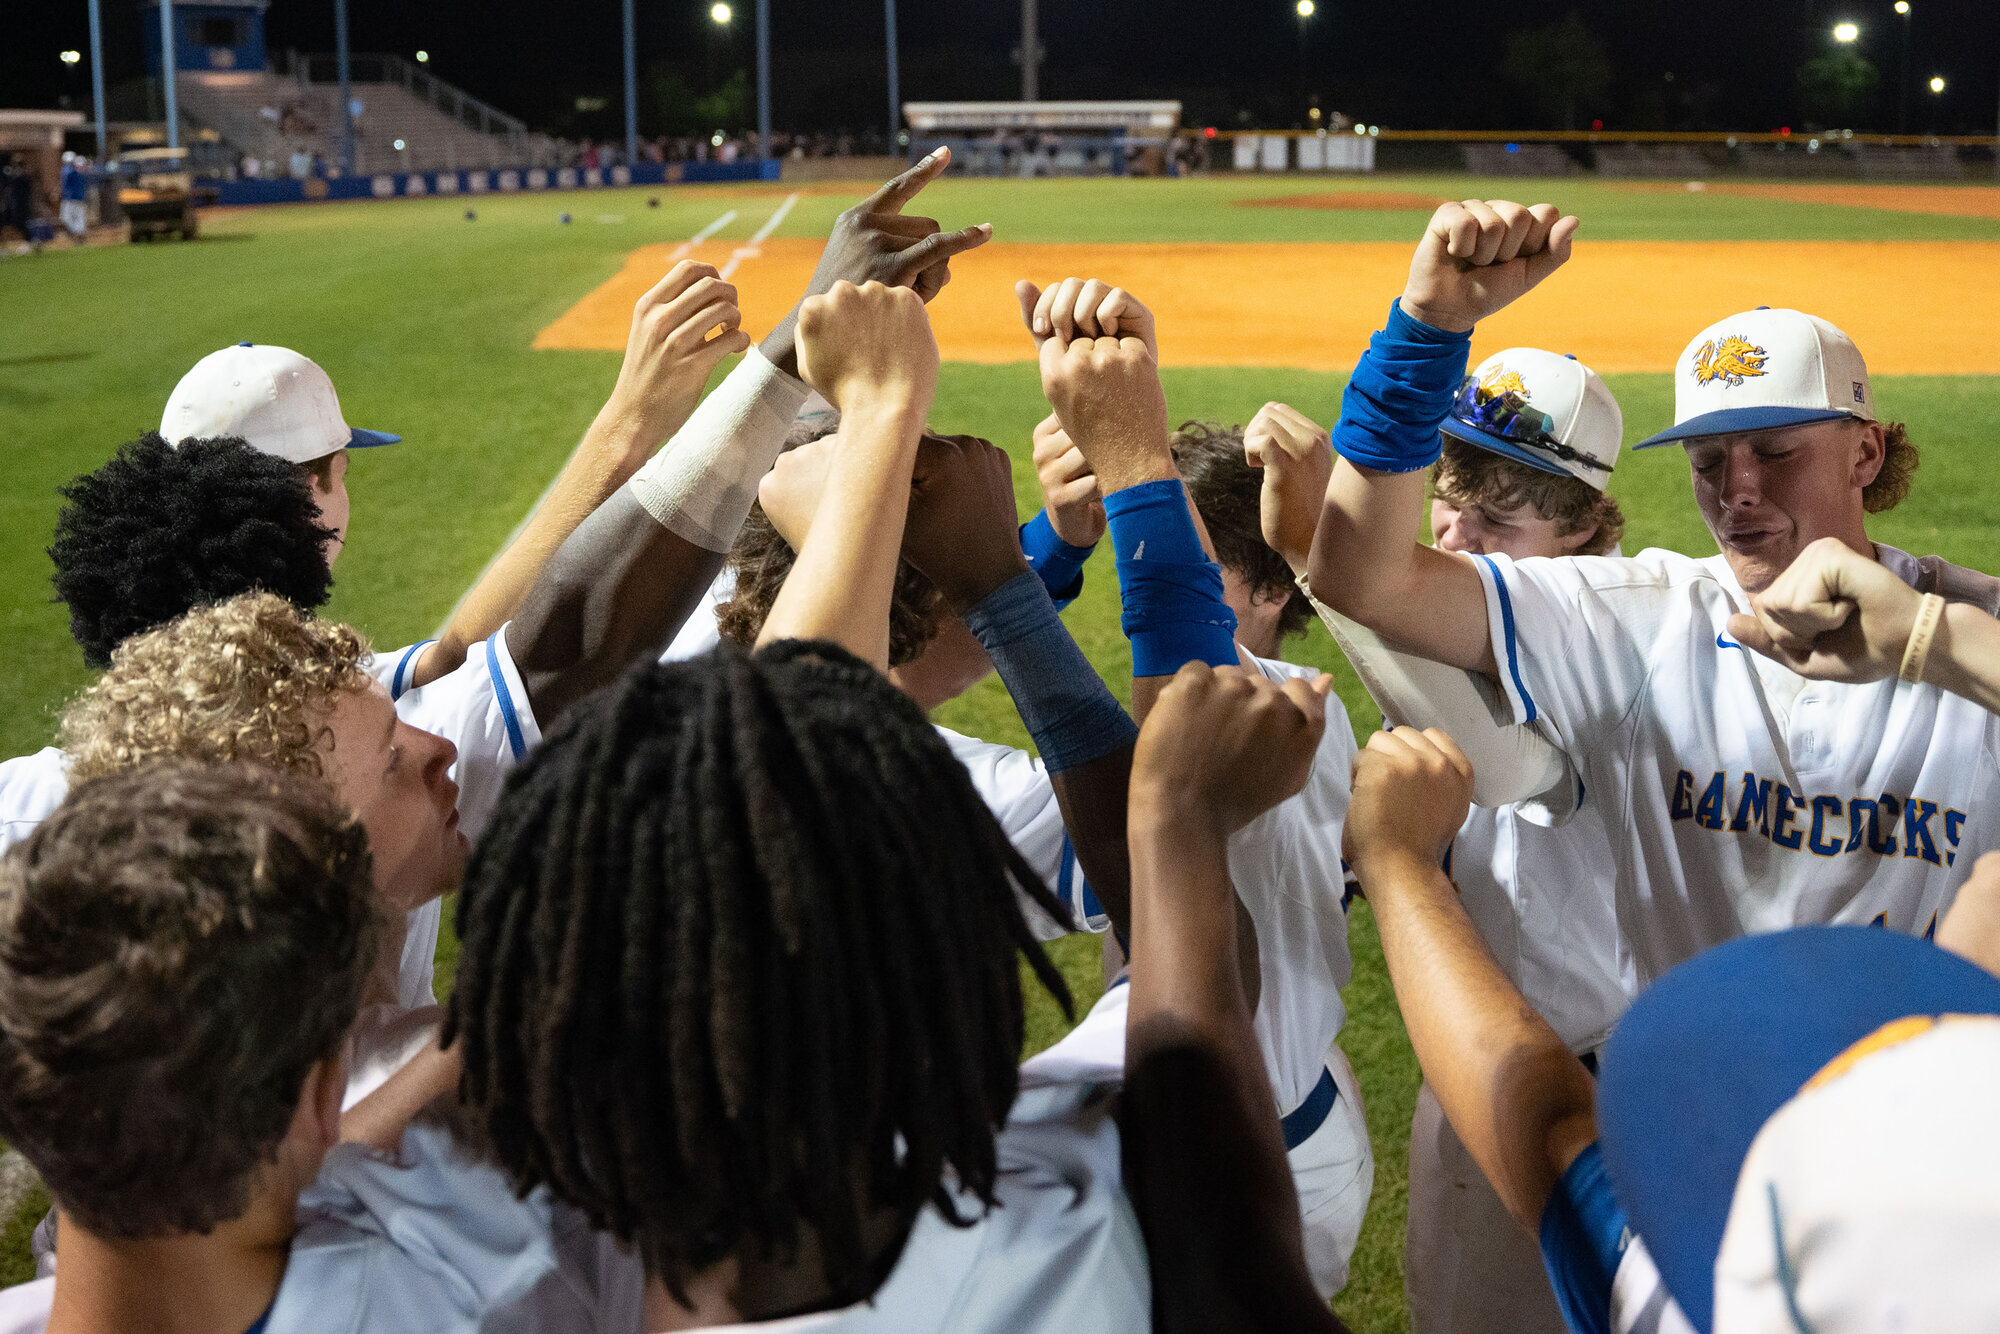 The Sumter High baseball team breaks down their huddle after their loss to River Bluff on Thursday, May 2.